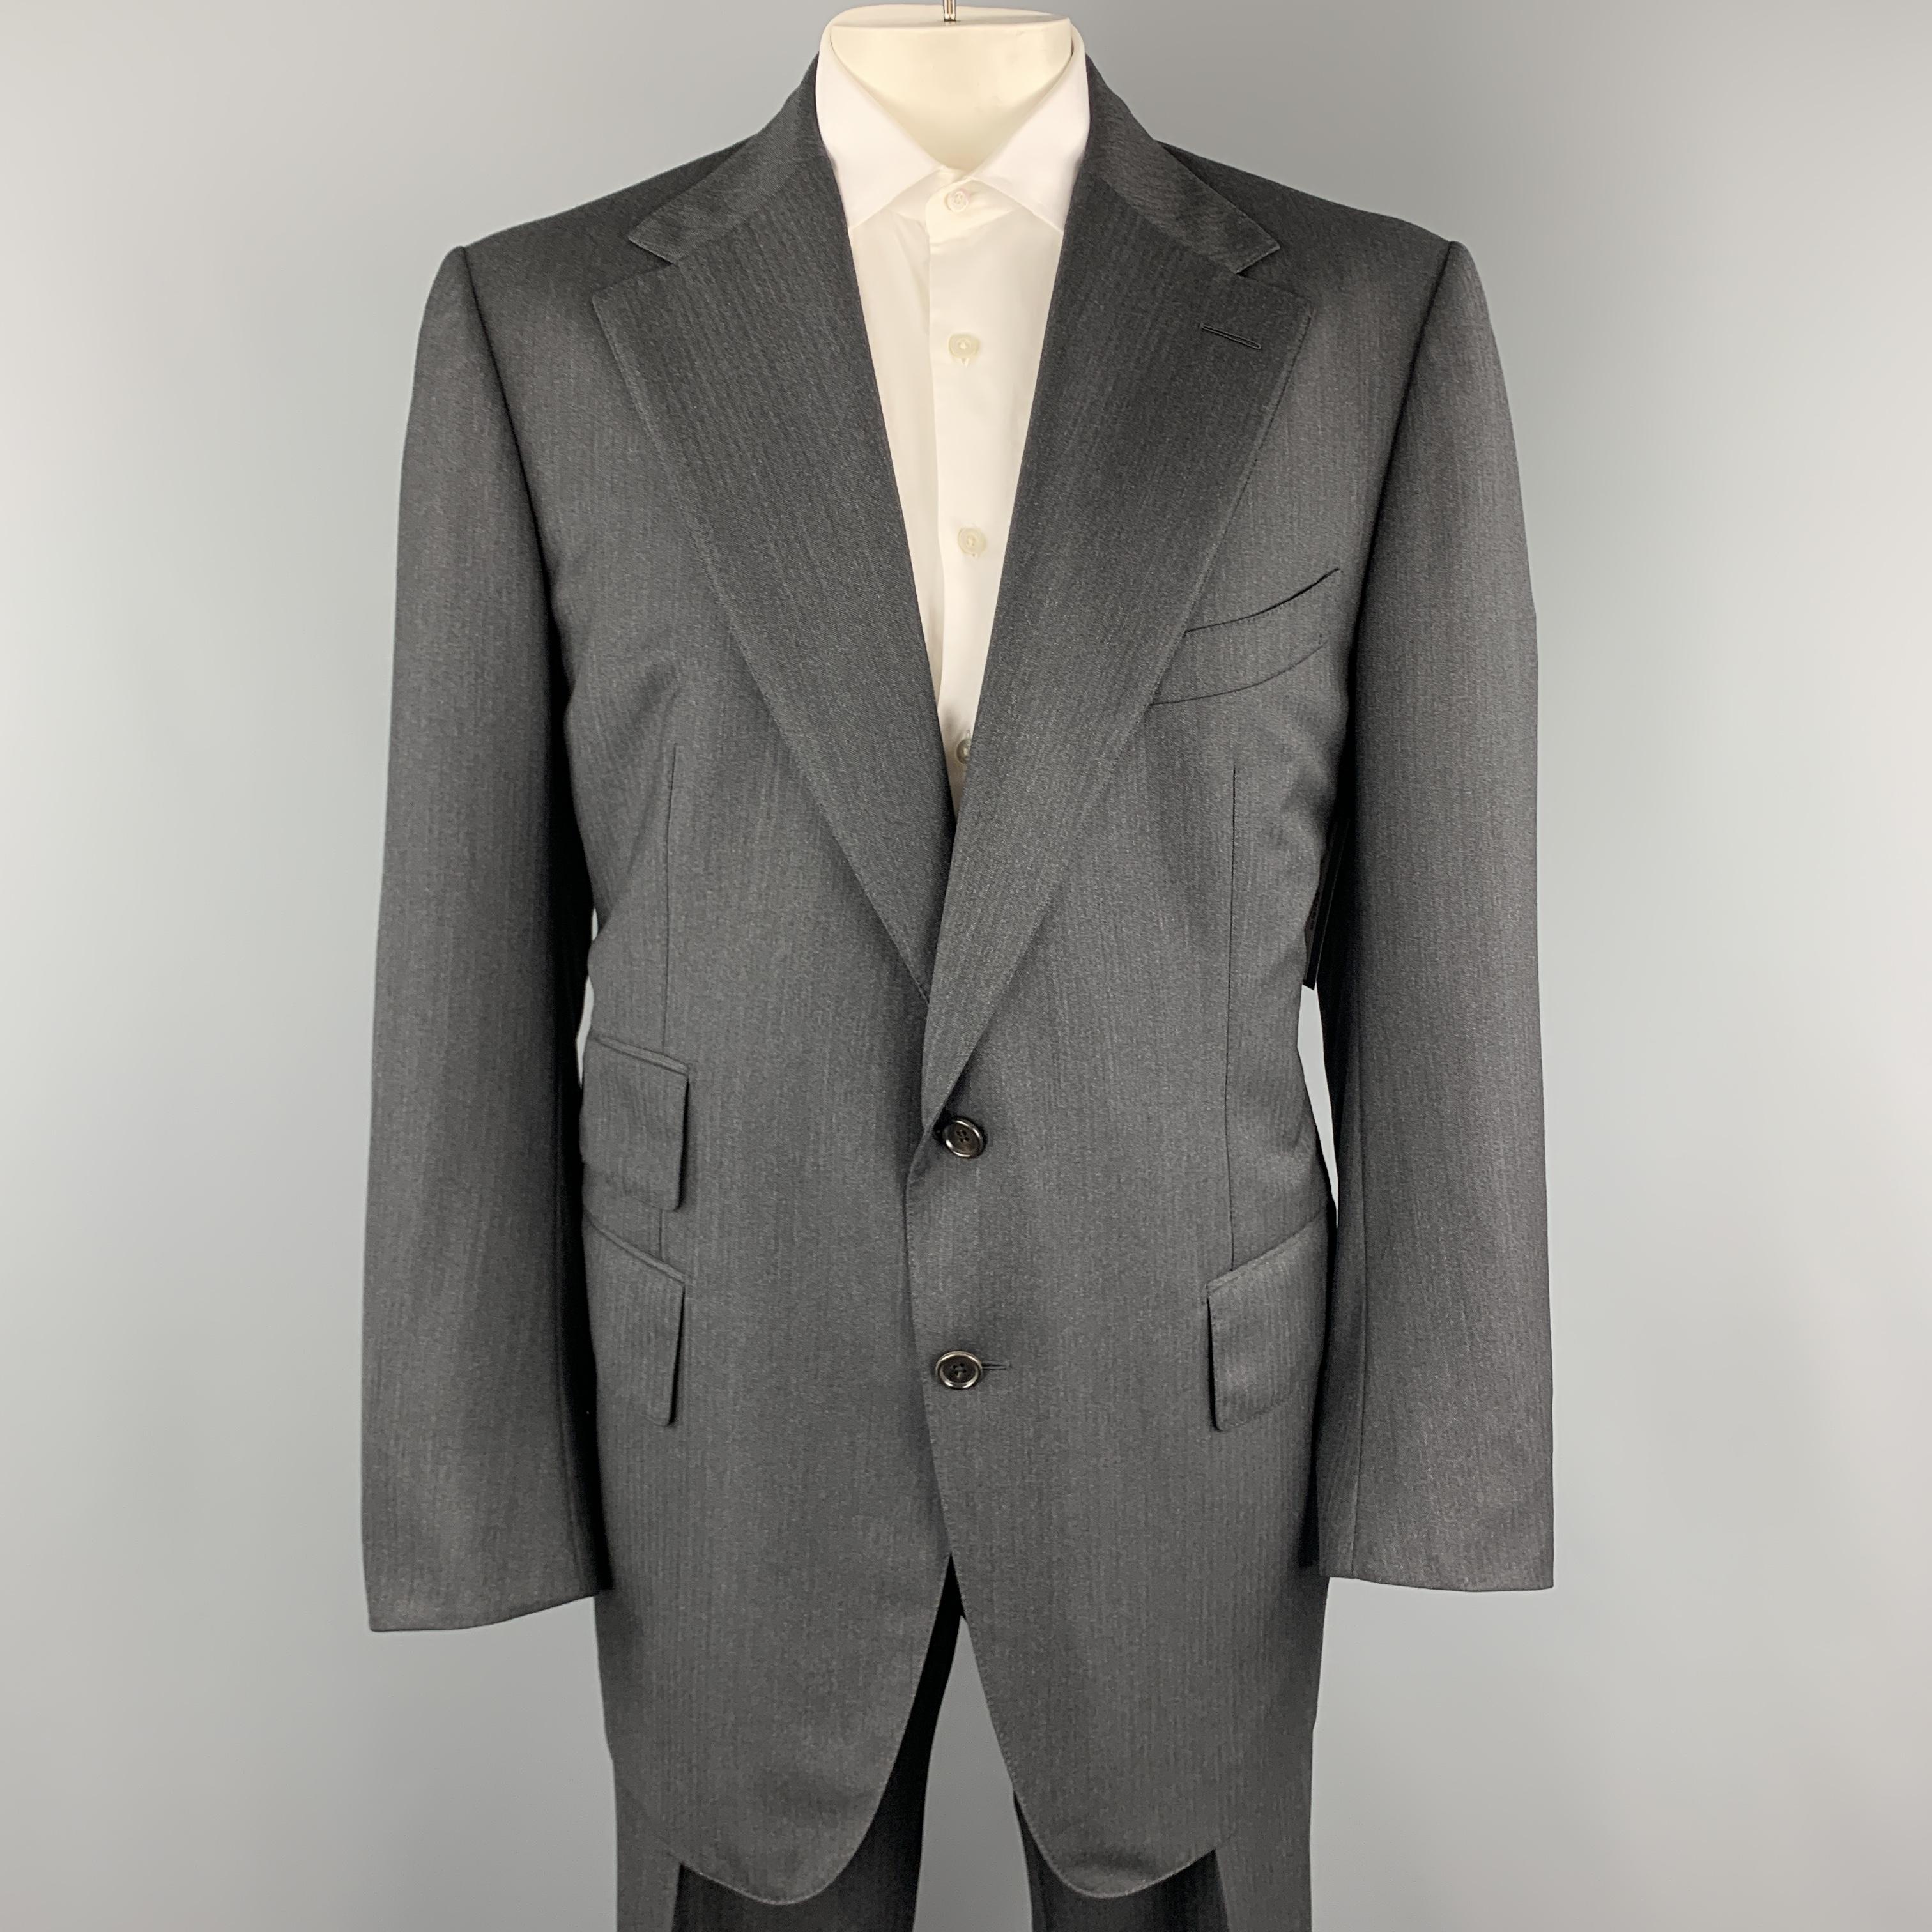 TOM FORD suit comes in charcoal gray wool herringbone and includes a single breasted, two button sport coat with a notch lapel and matching pleated front cuffed trousers with side tabs. Altered. As-is. Made in Italy.

Excellent Pre-Owned